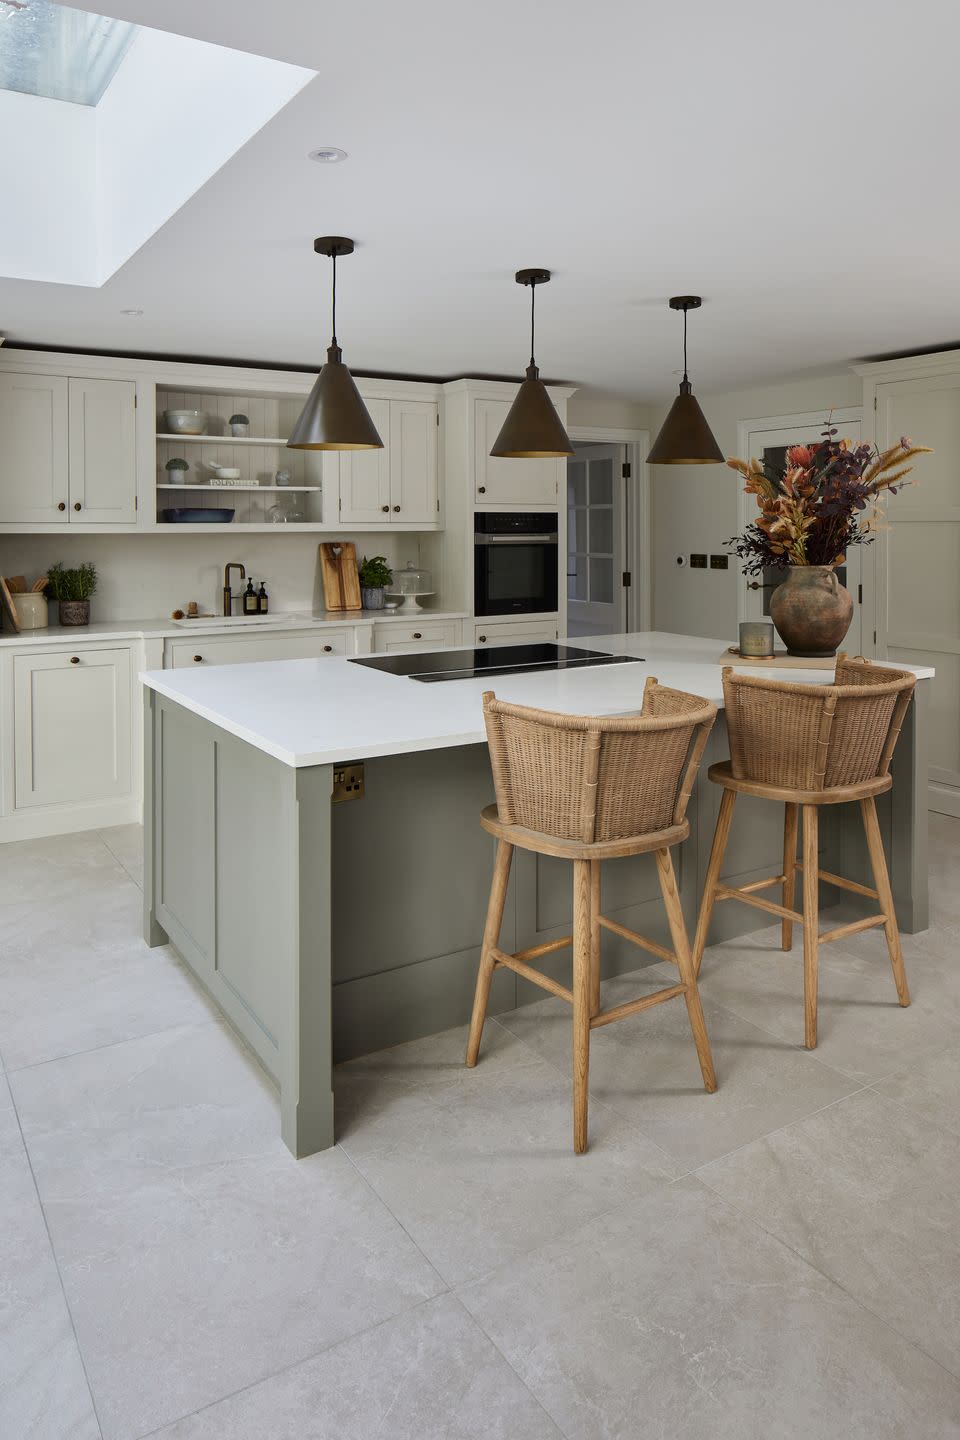 Gray kitchen with pale gray porcelain floor tiles, breakfast bar and wicker bar stools